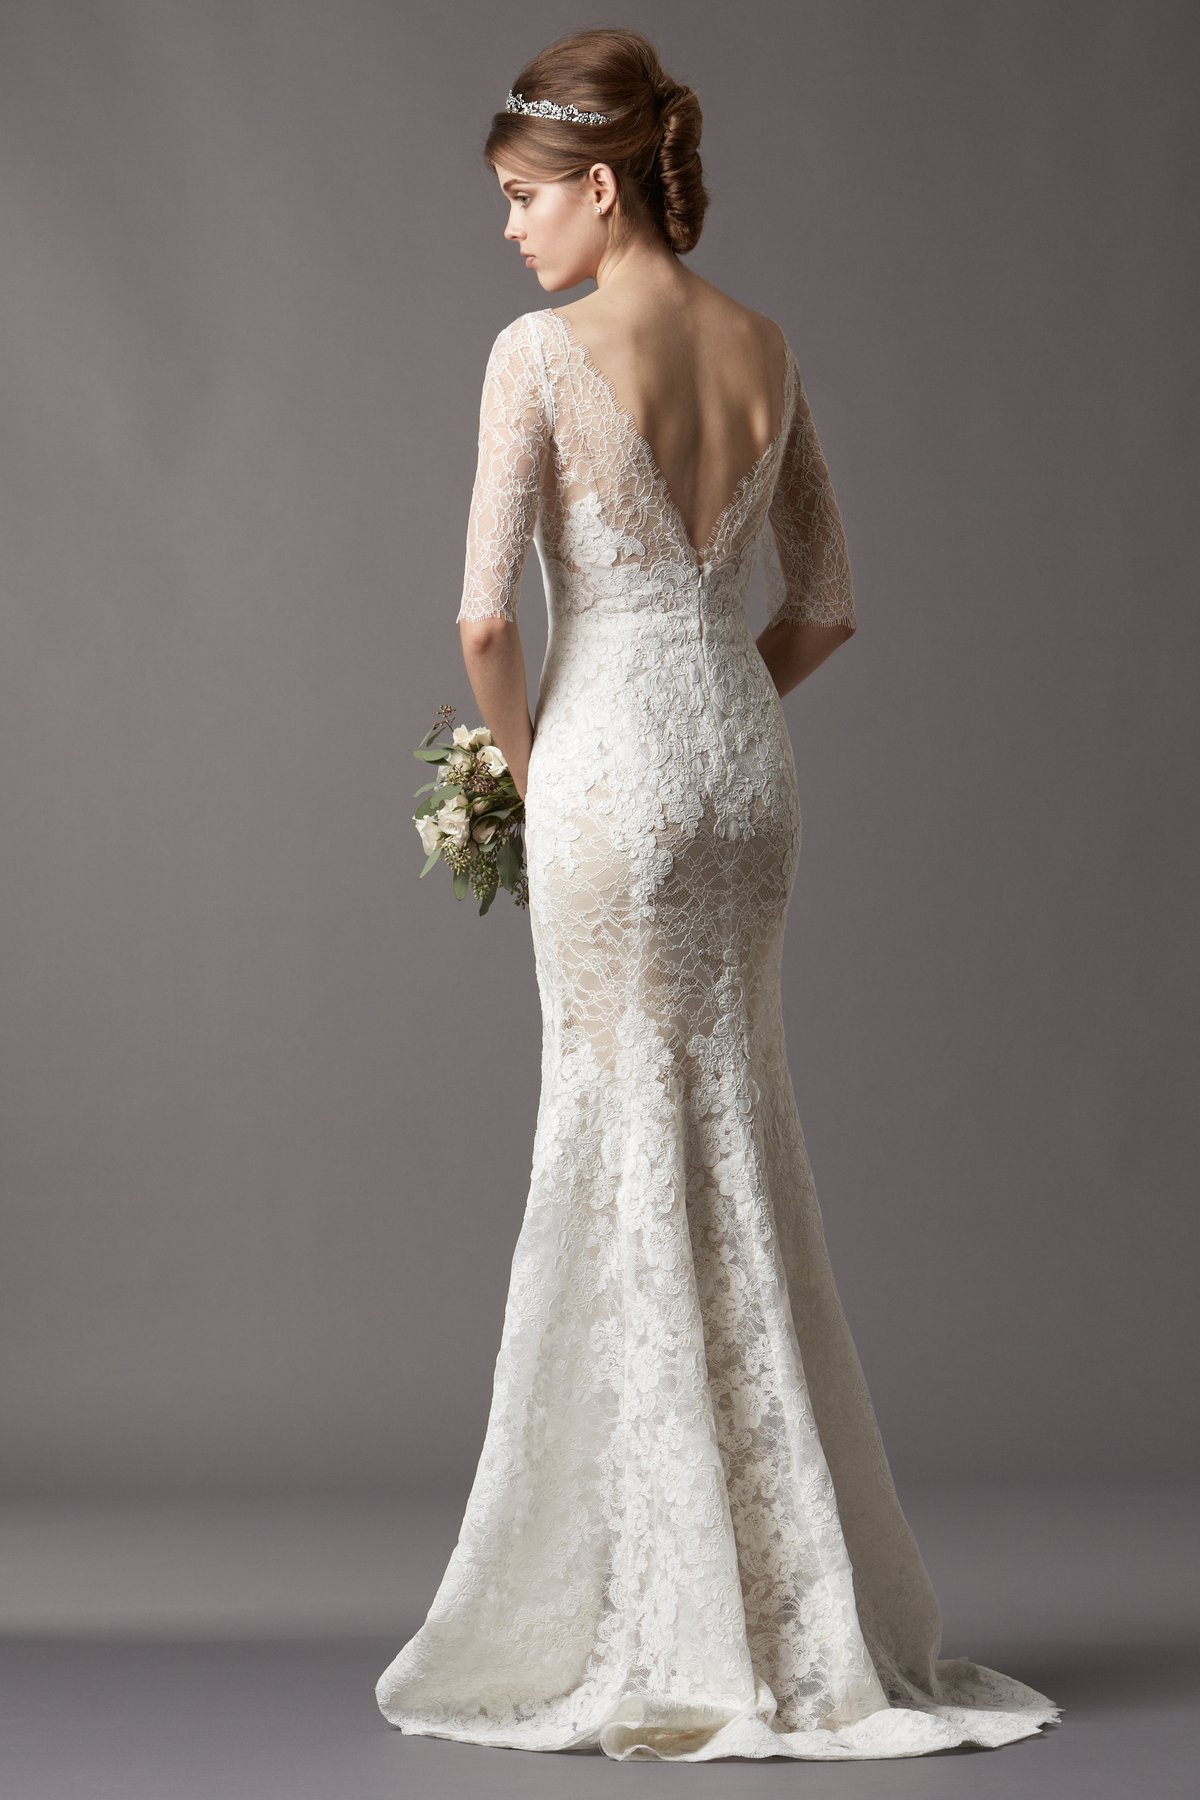 2014 - 2015 Wedding Dress Trends - Lace Sleeves